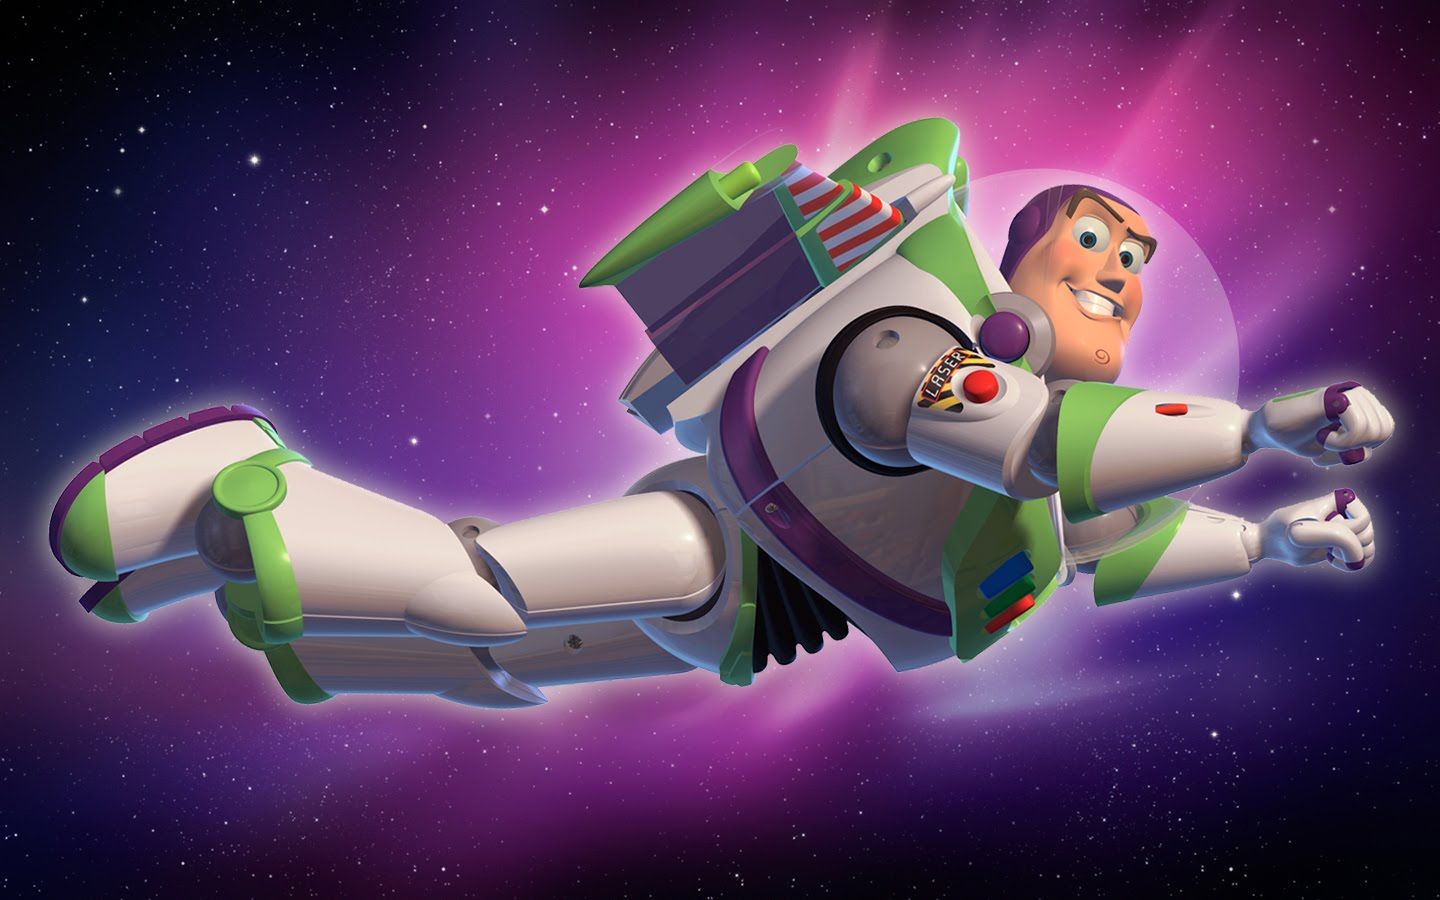 Buzz Wallpapers